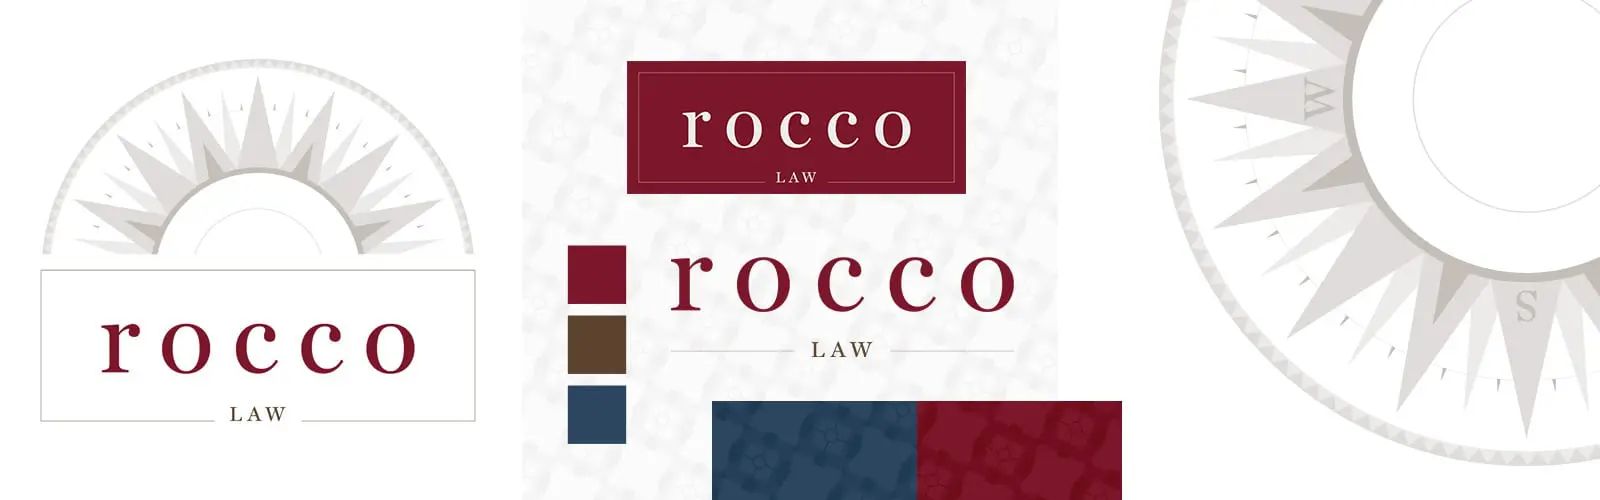 Law Firm Branding and Logo Design